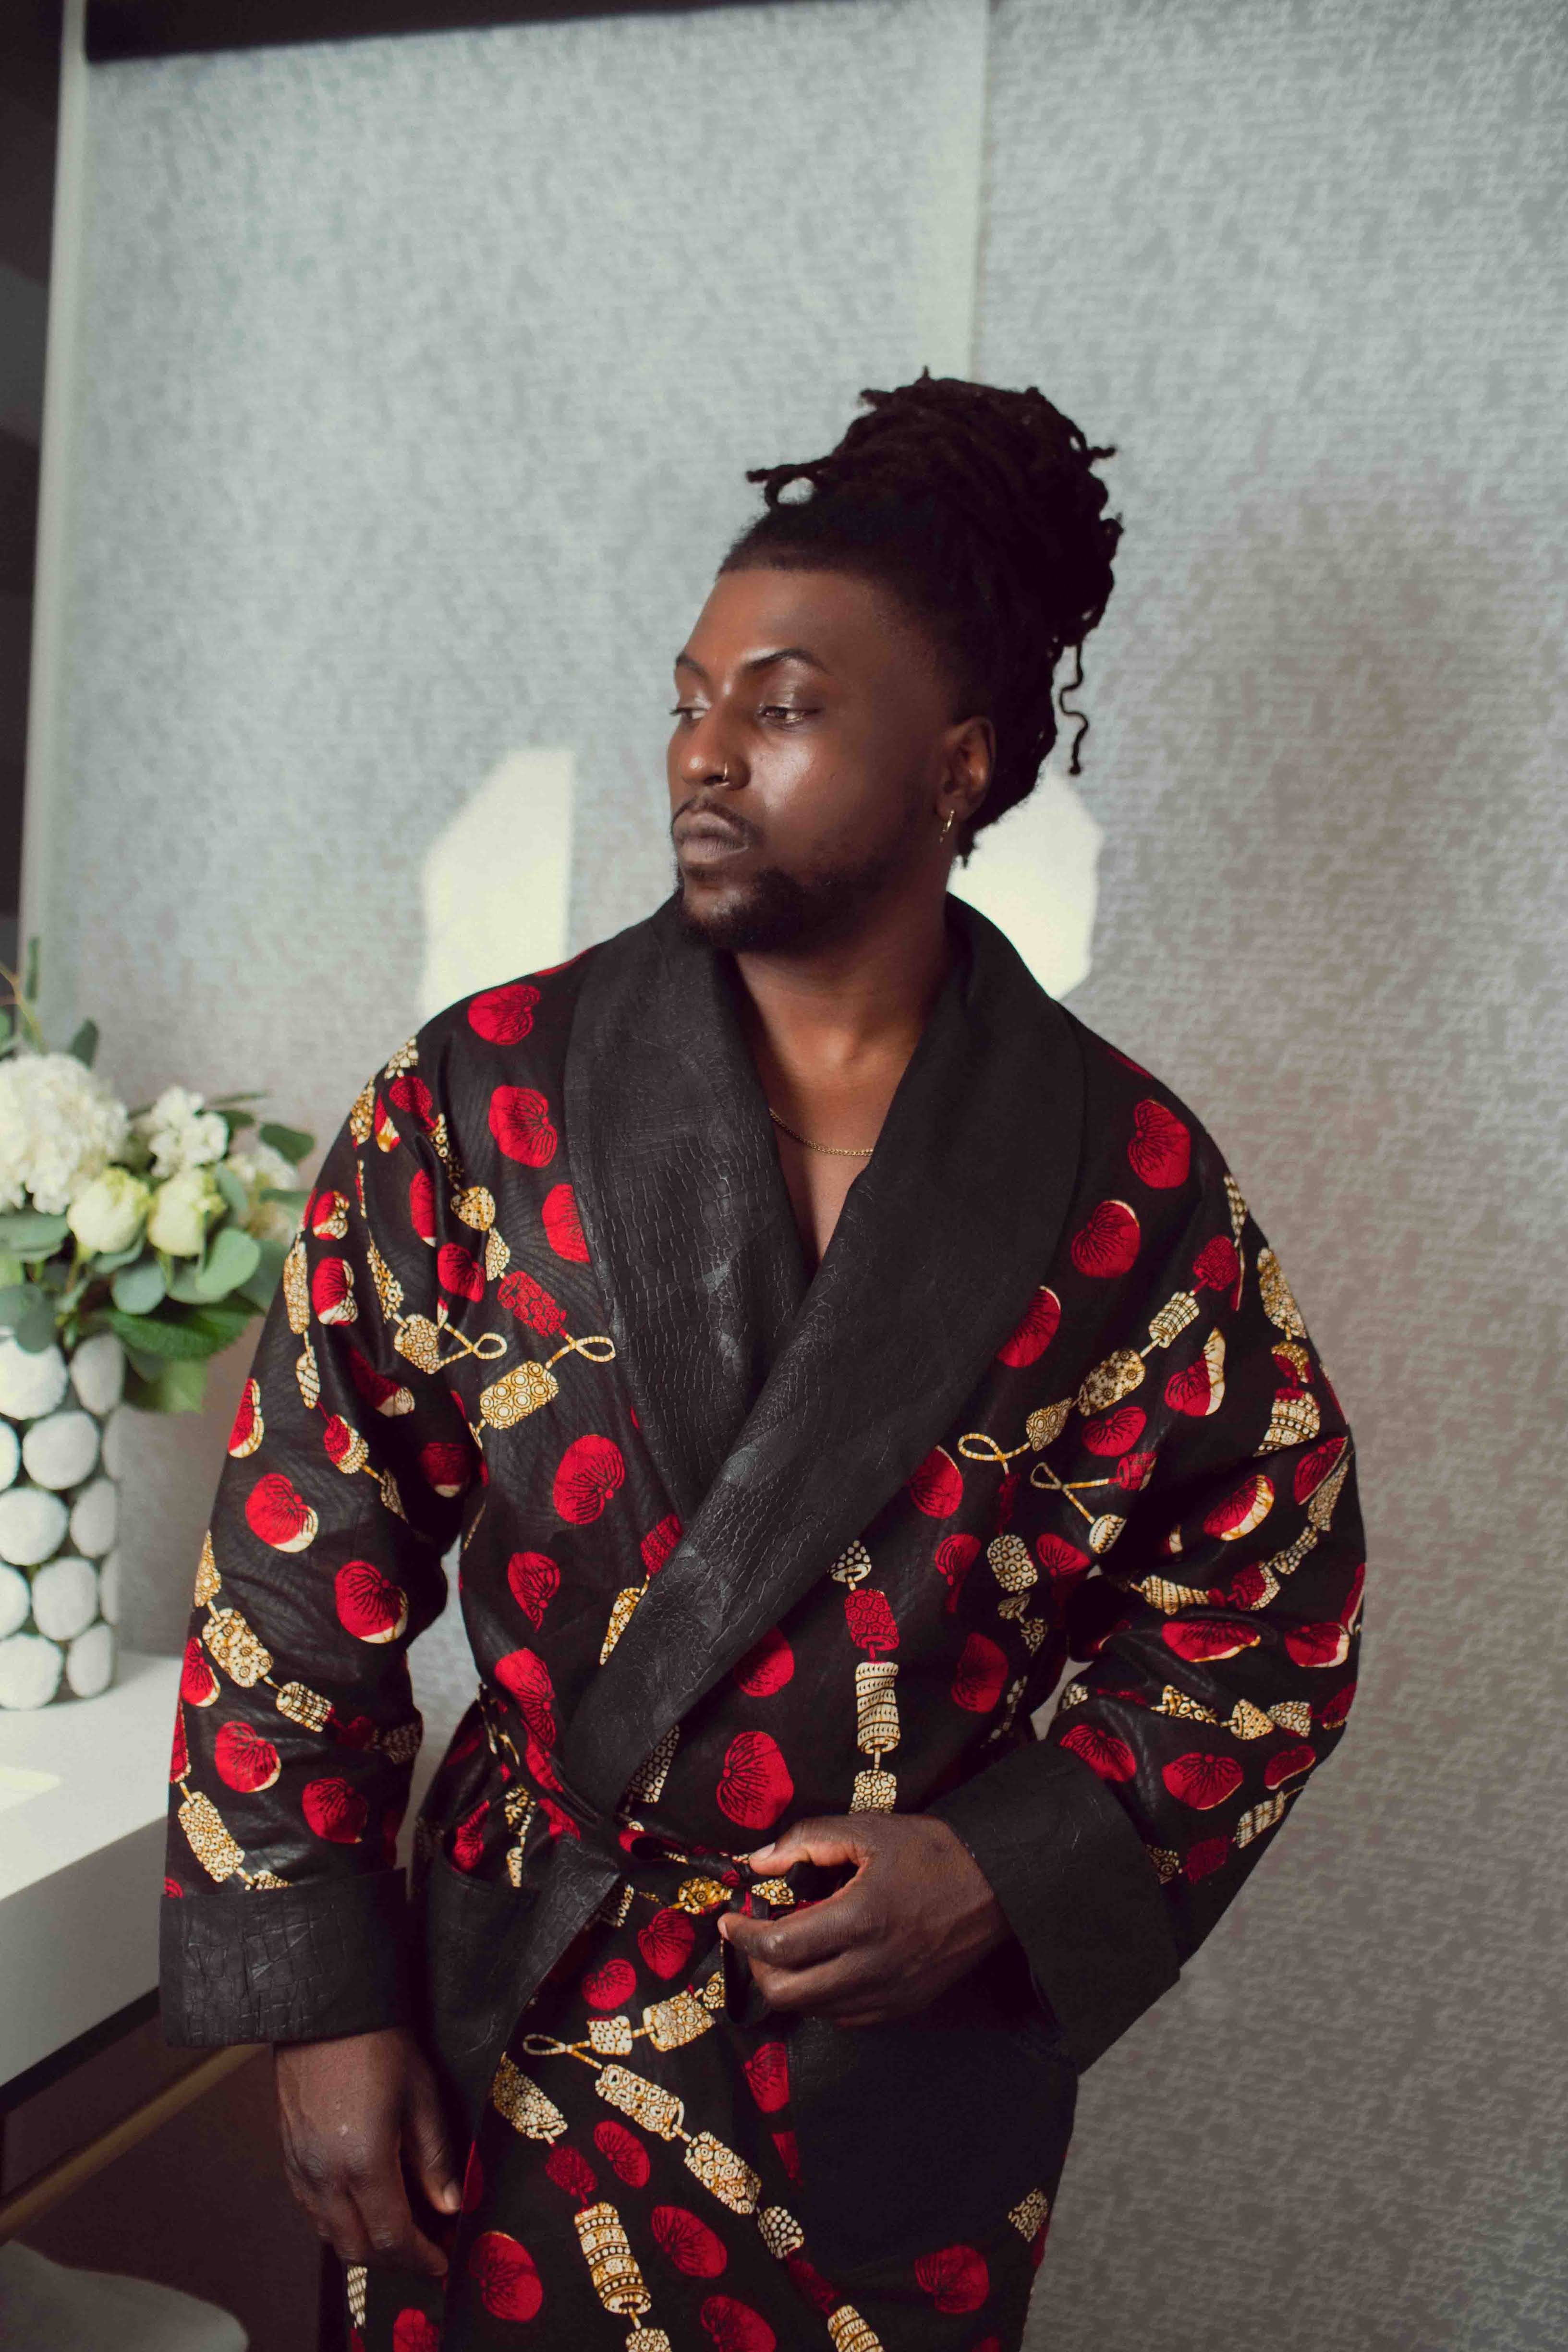 Black man with locs in a top bun wears small patterned red and cream smoke jacket with textured black cotton while in the bathroom